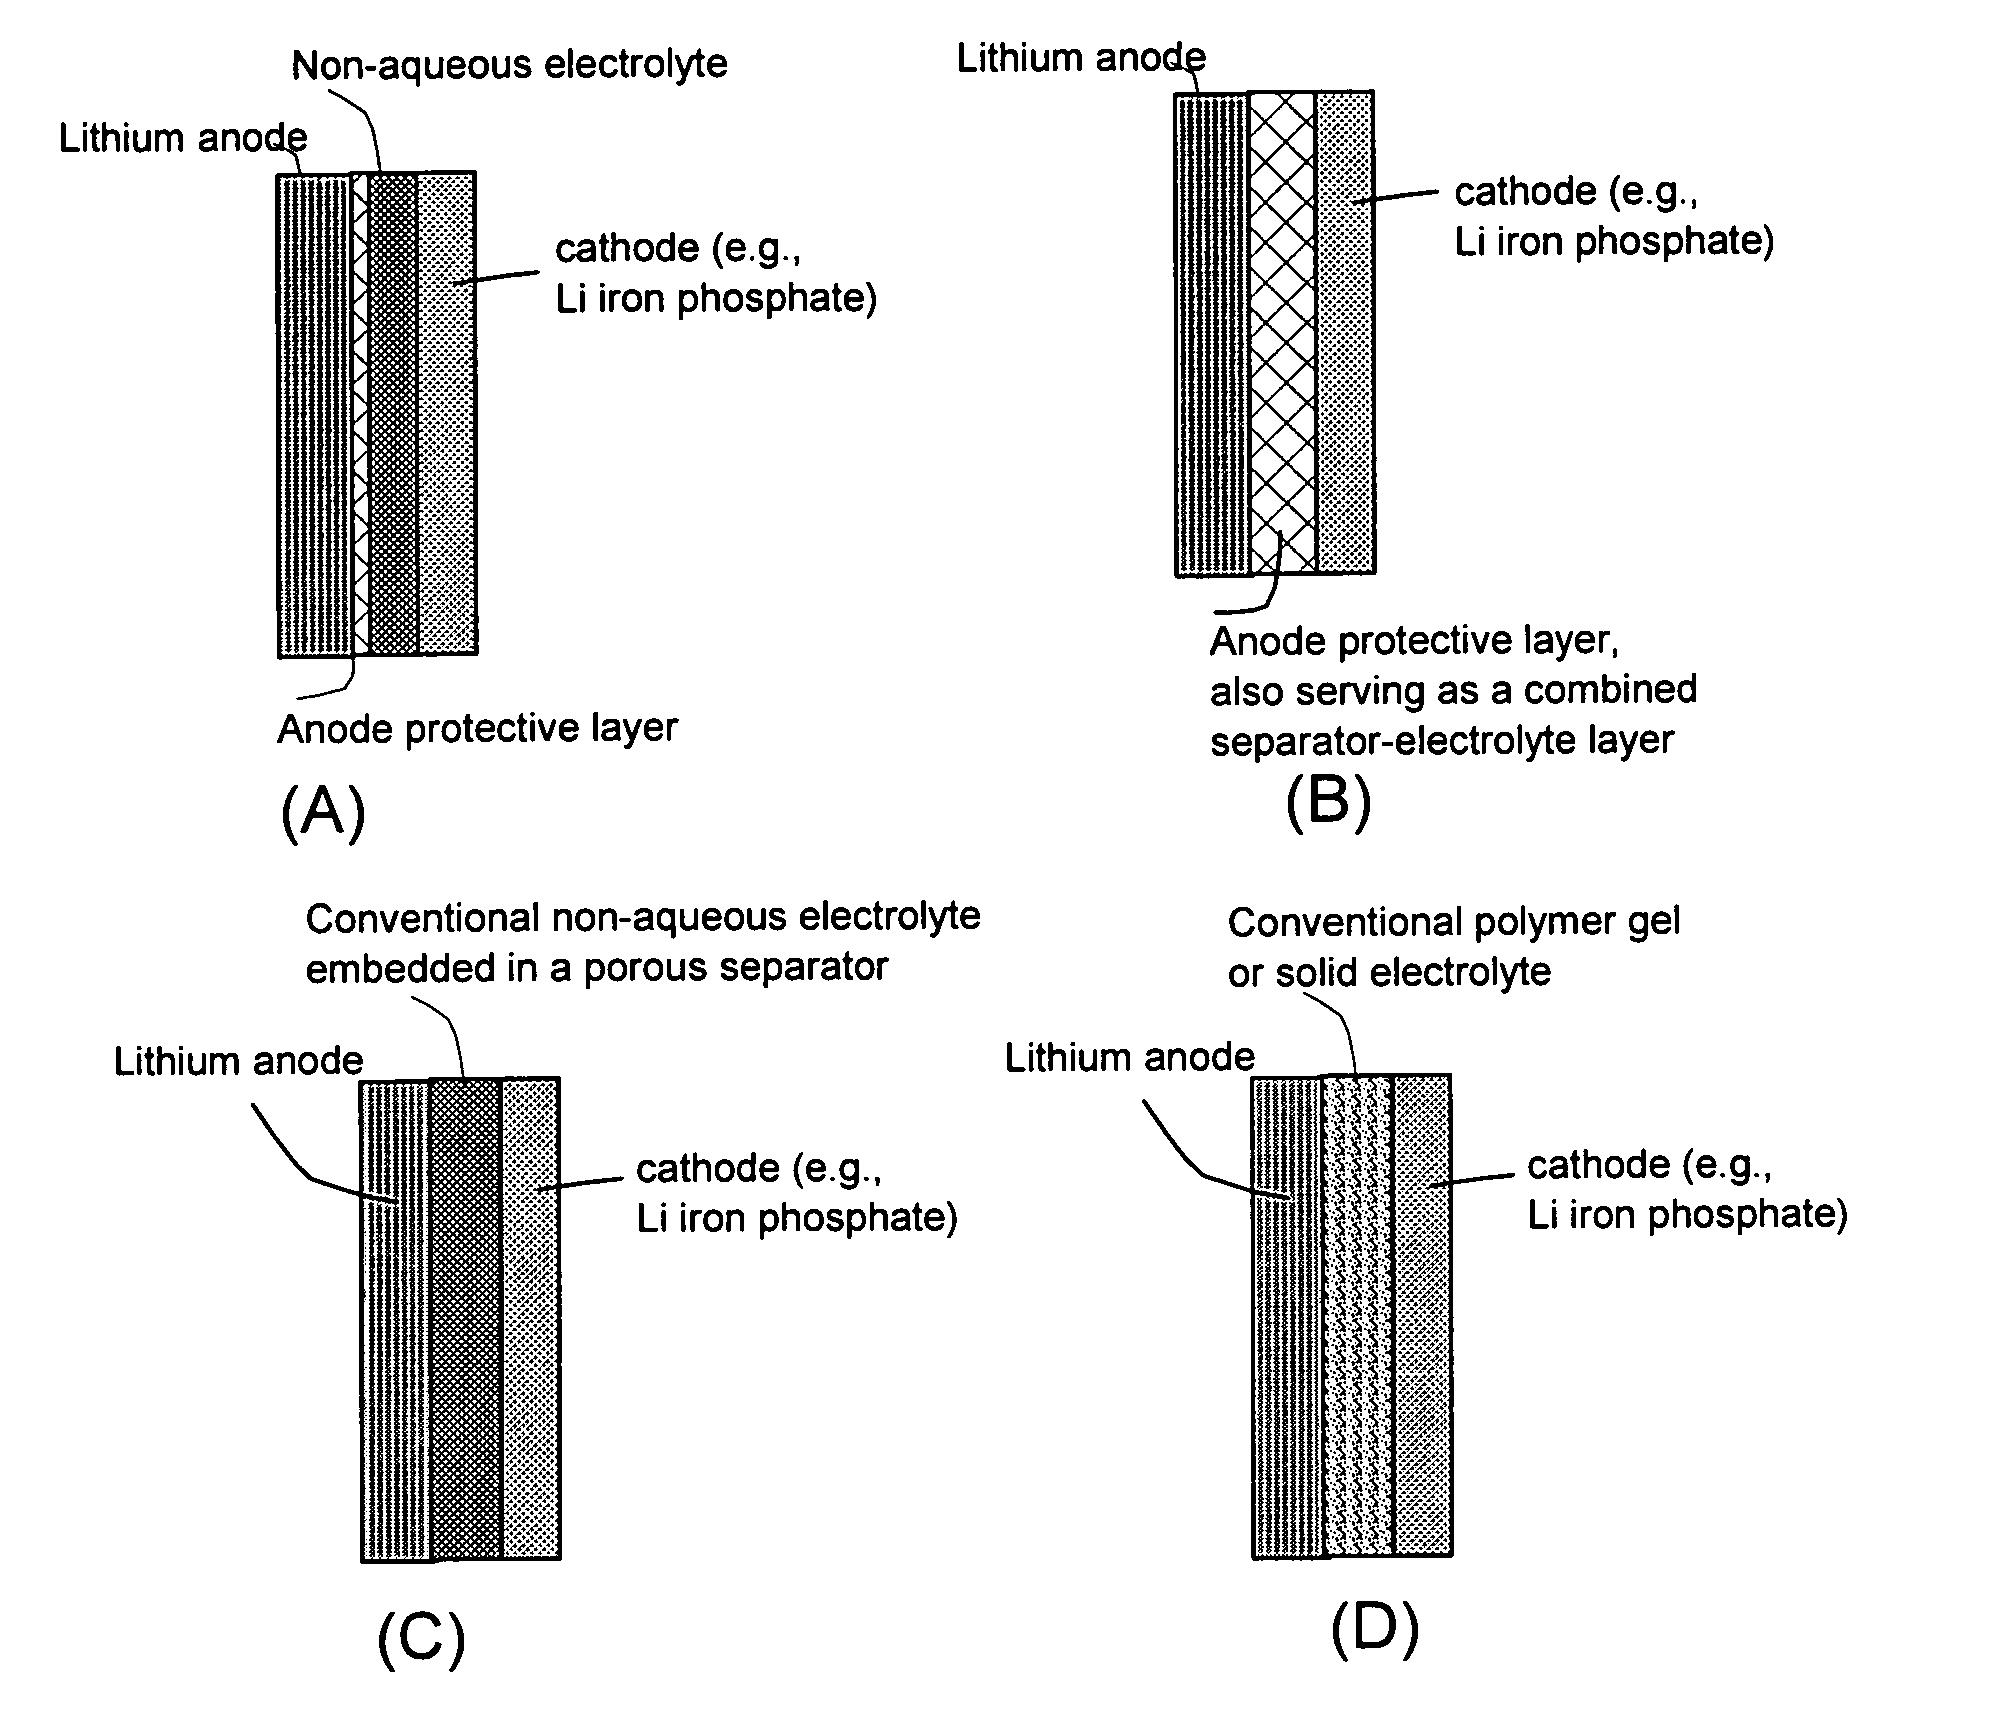 Anode protective layer compositions for lithium metal batteries